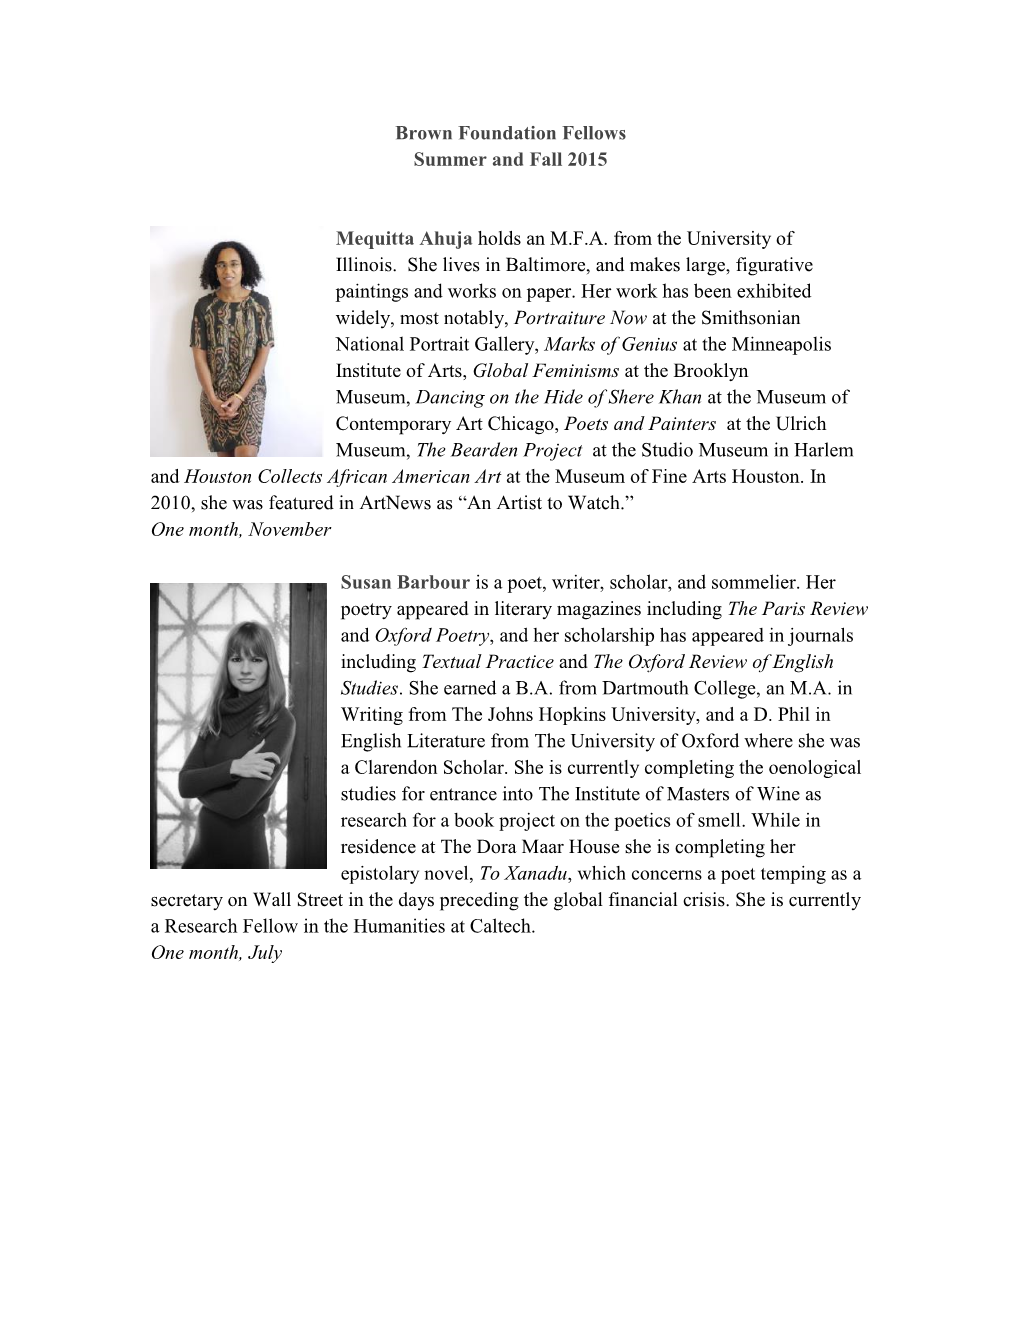 Brown Foundation Fellows Summer and Fall 2015 Mequitta Ahuja Holds